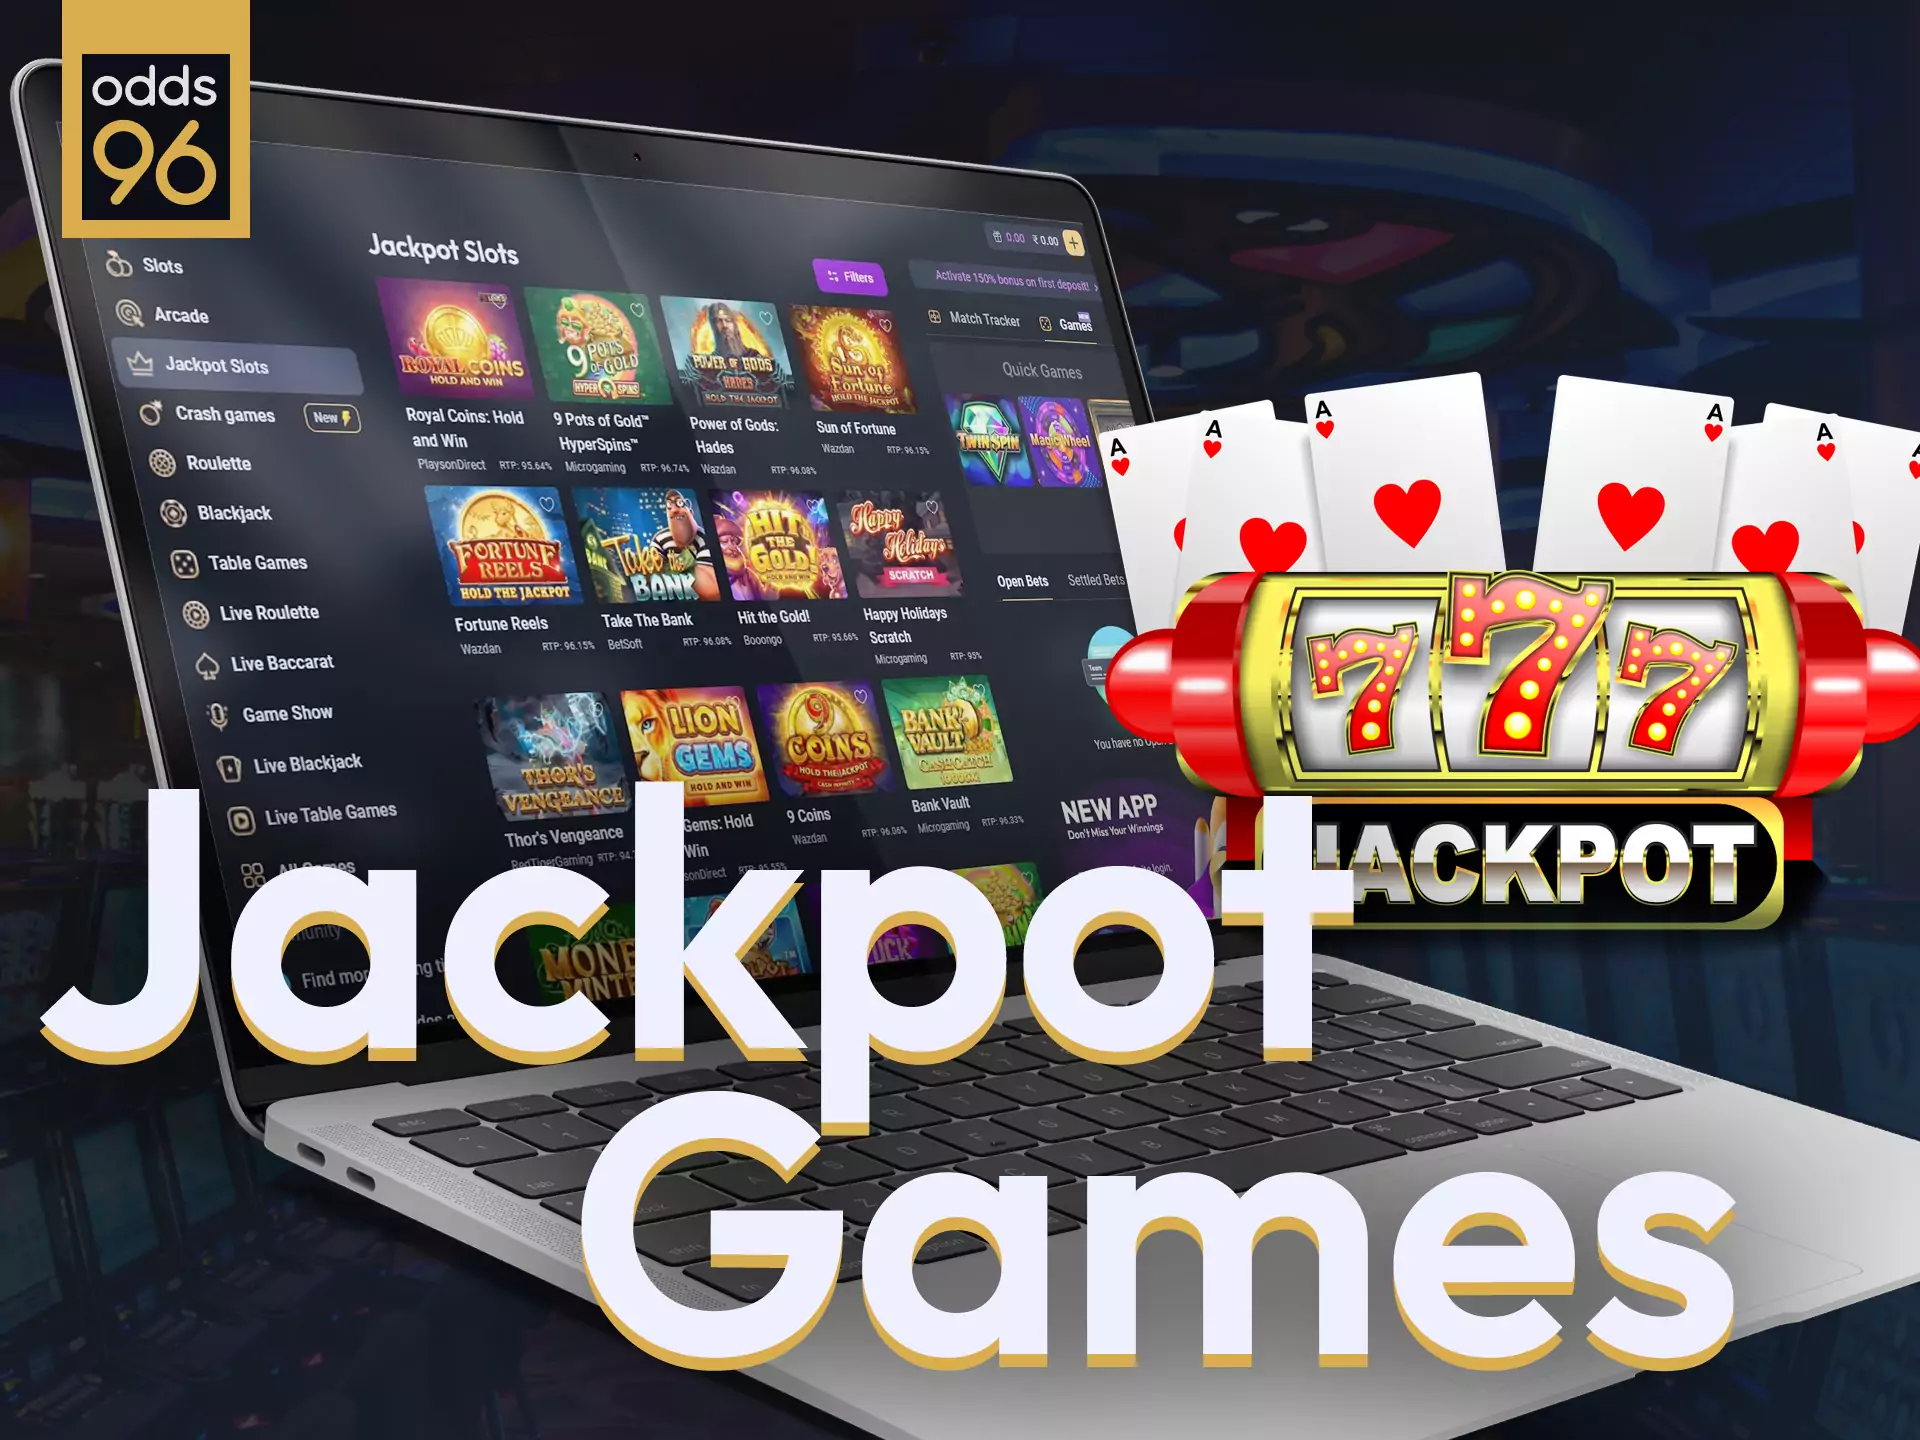 Place bets at Odds96 casino on jackpot games.